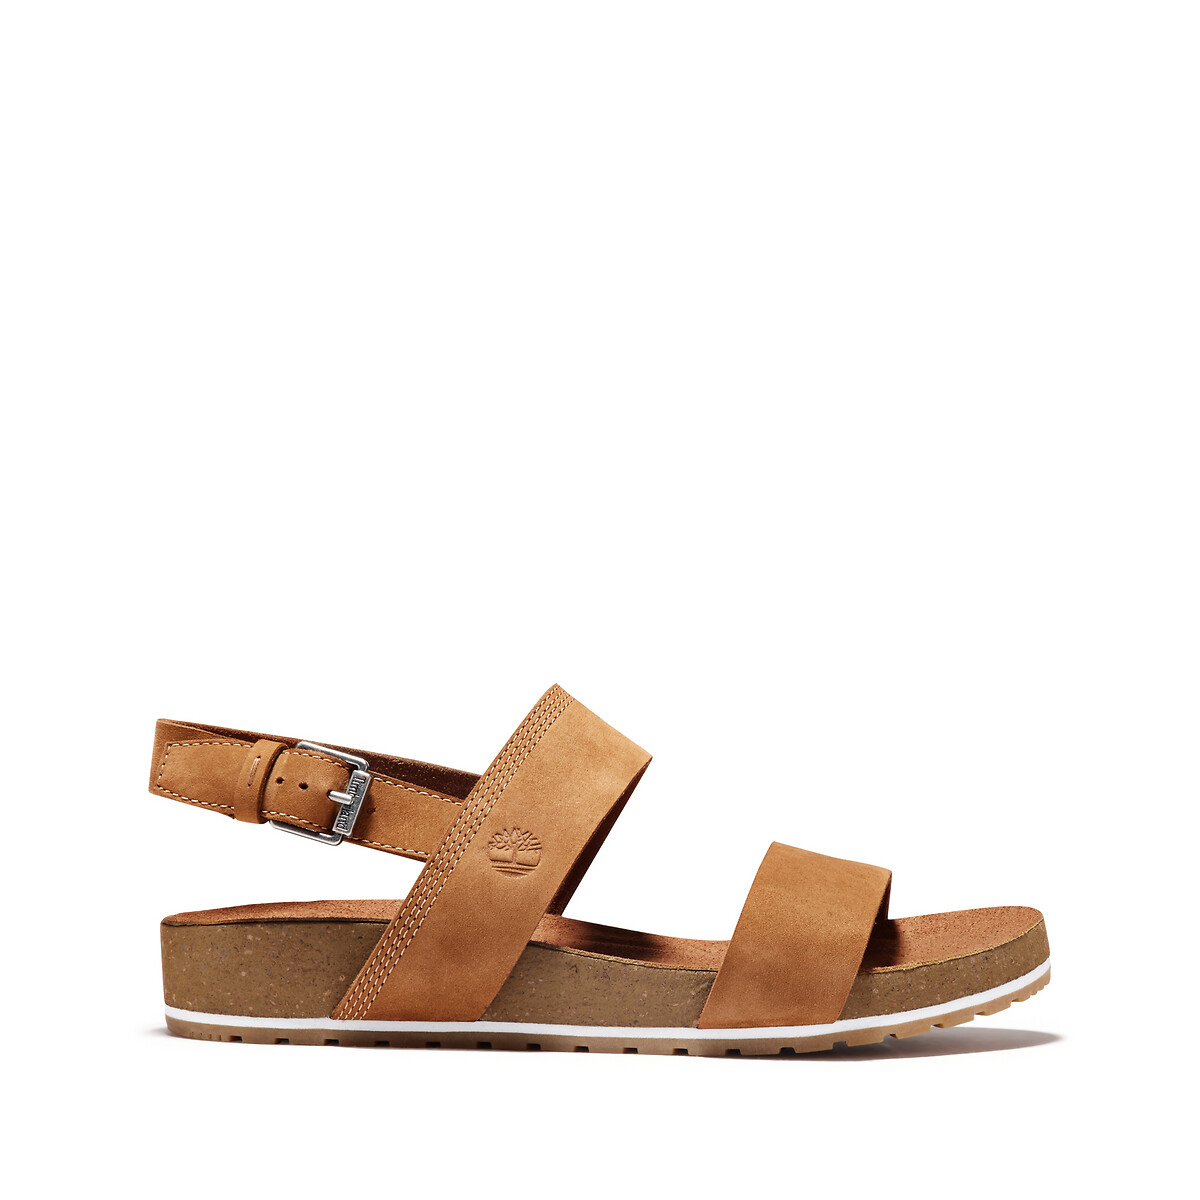 Image of Malibu 2 Band Sandals with Wedge Heel in Leather